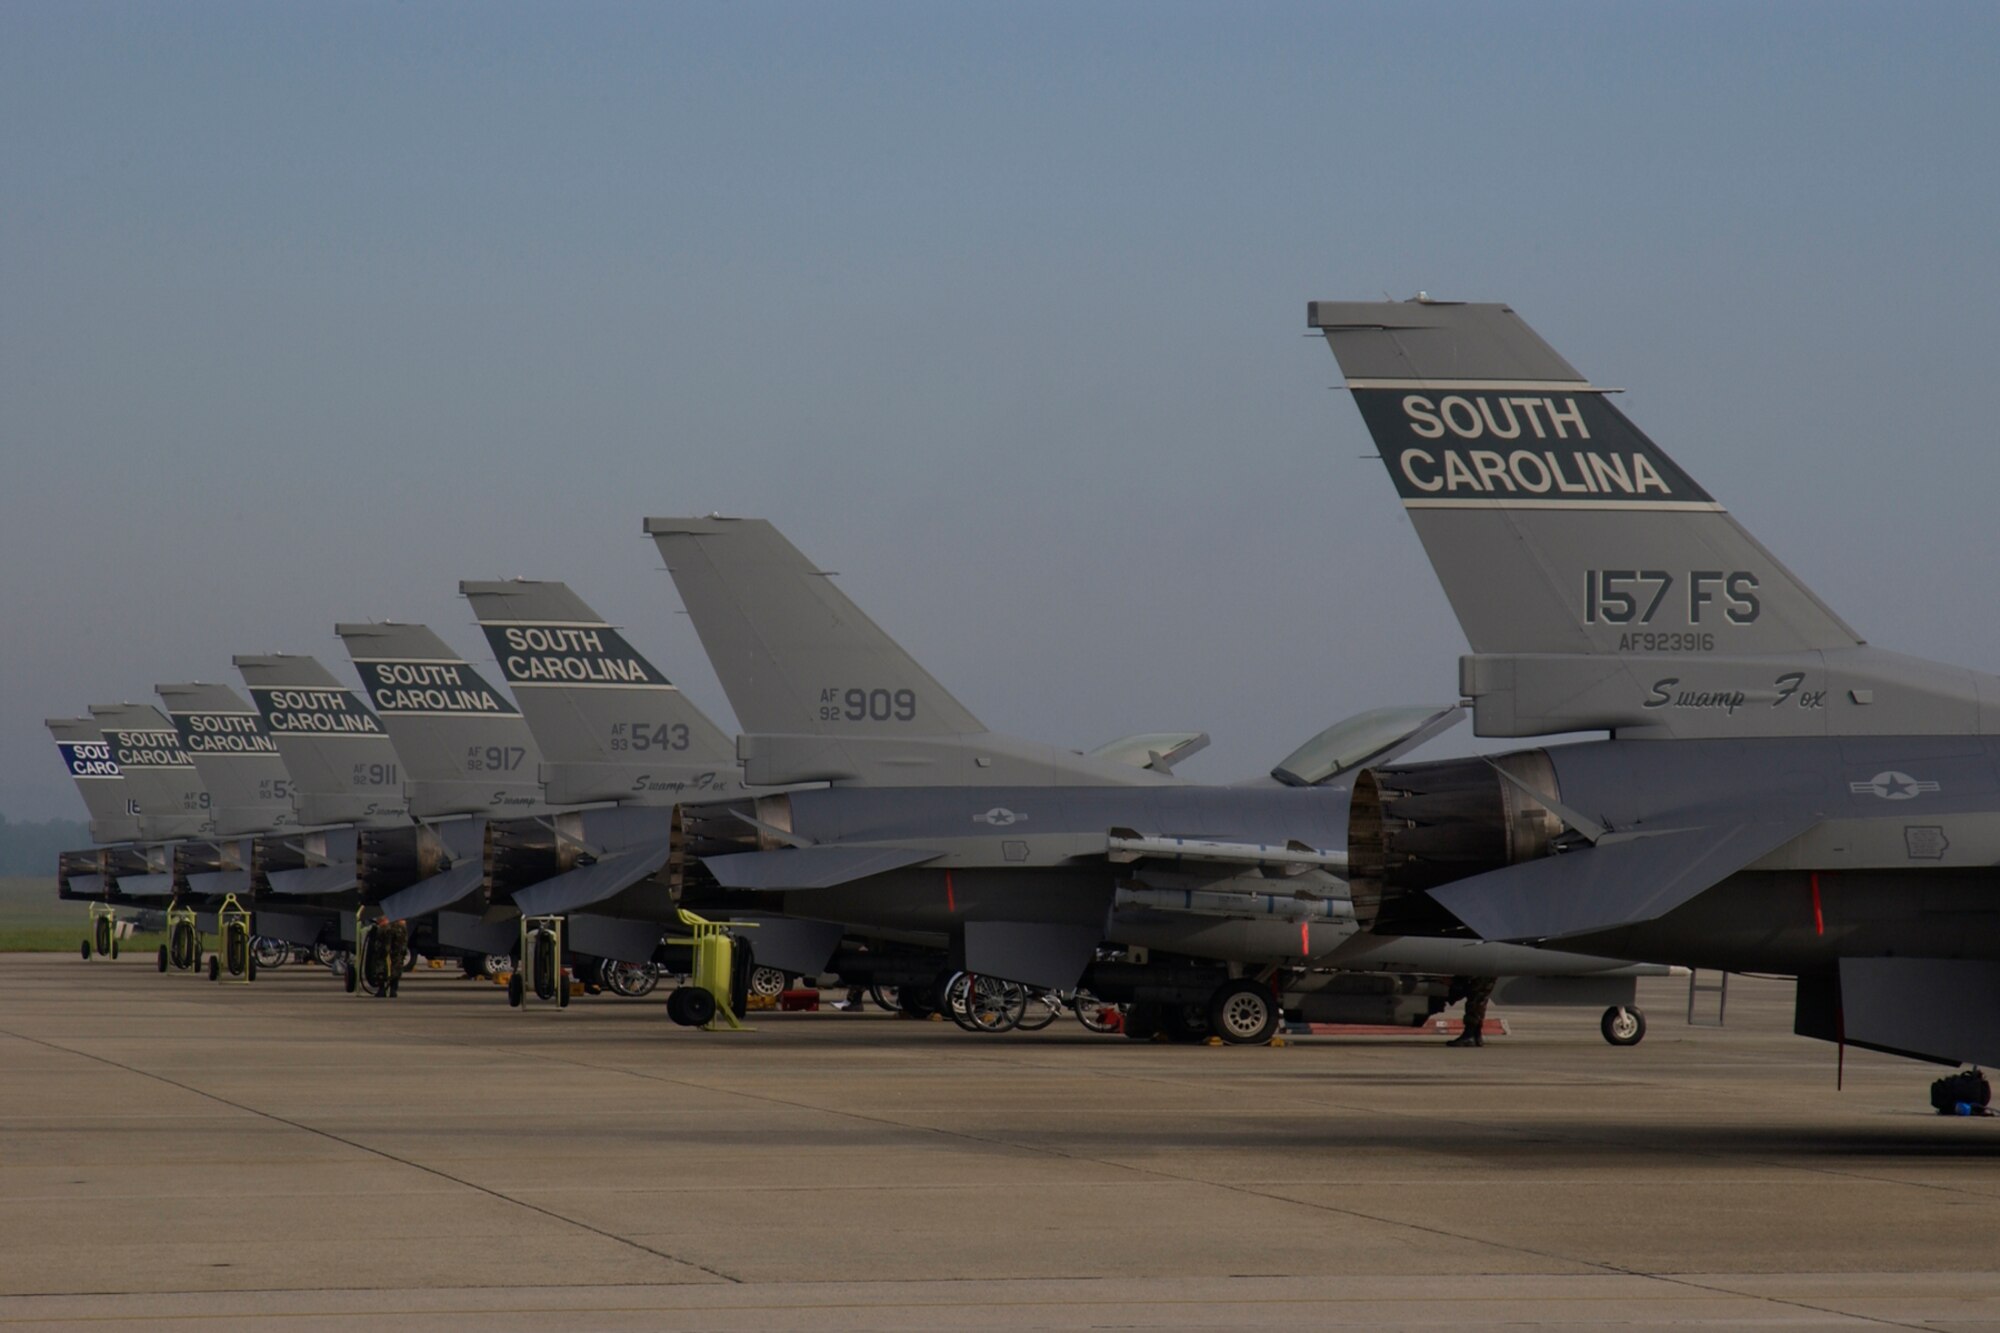 U.S. Air Force F-16 Fighting Falcons assigned to the 157th Fighter Squadron at McEntire Joint National Guard Base, South Carolina Air National Guard, line the flight line on May 15, 2006, before taking off for the Combat Readiness Training Center in Savannah, Ga., to participate in an Operational Readiness Exercise (Phase I ORE). The Phase I ORE evaluates a unit’s ability to process personnel and equipment from home station to a deployed location safely and efficiently. The South Carolina Air National Guard (SCANG) is training for an upcoming Operational Readiness Inspection (ORI) in 2007. (U.S. Air National Guard photo by Senior Master Sgt. Edward Snyder/RELEASED)